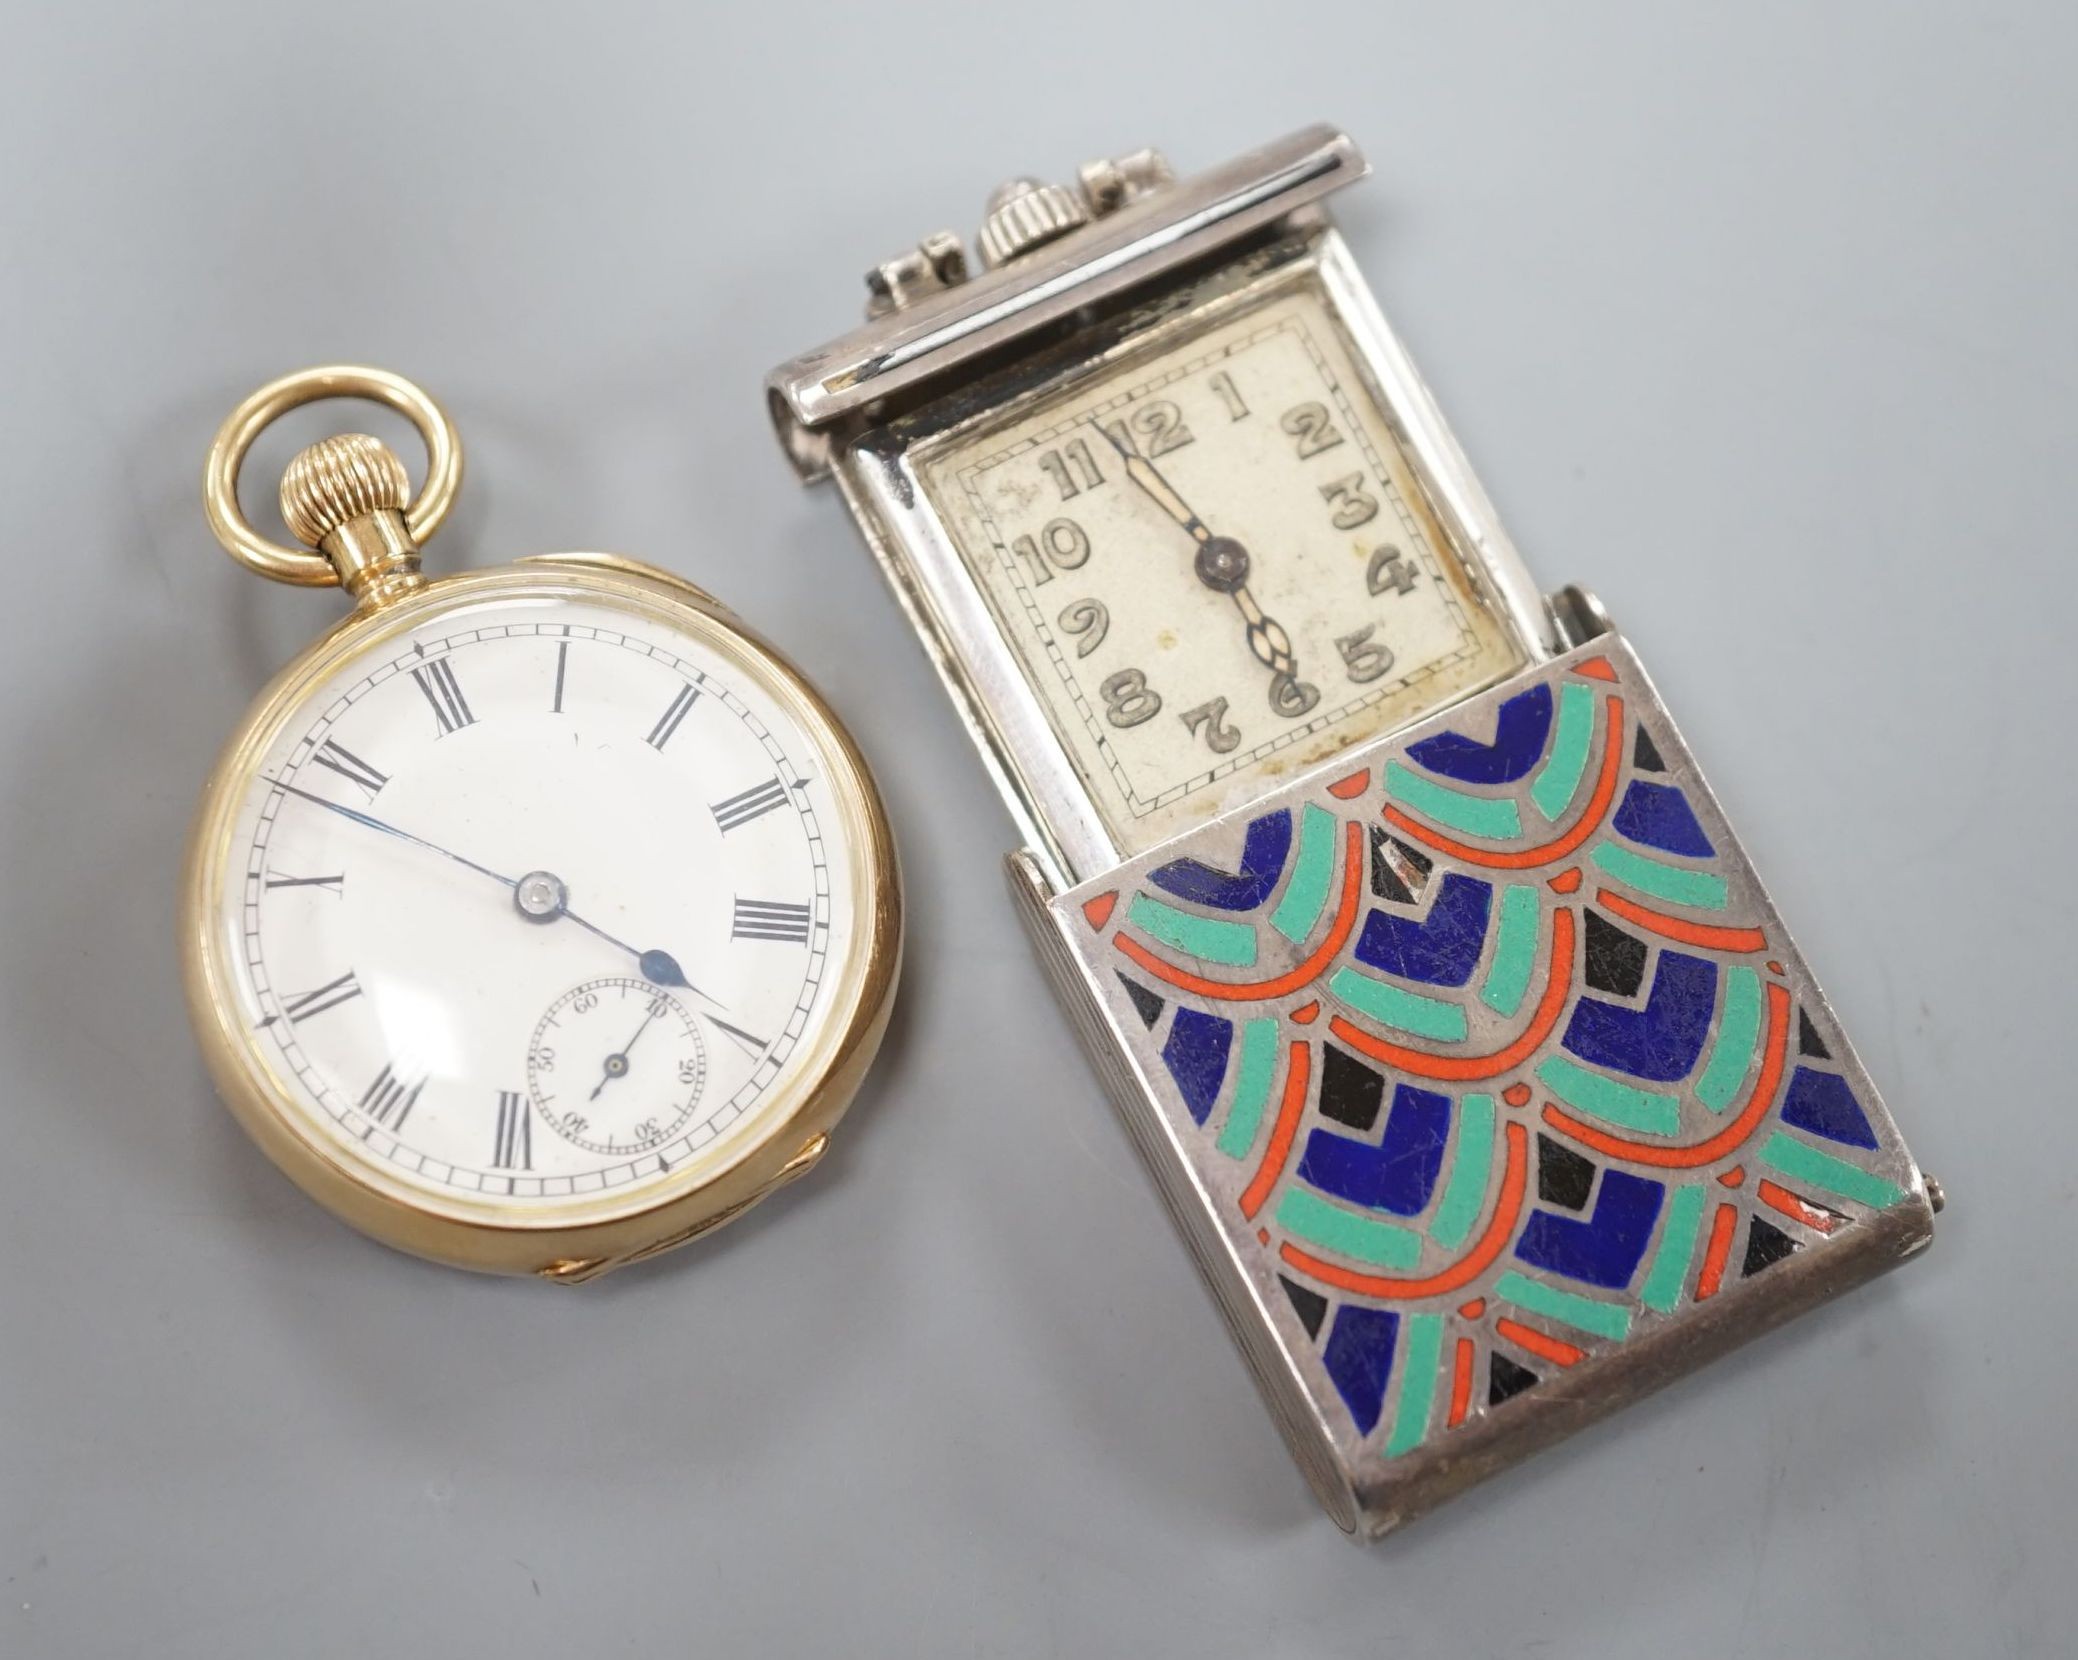 A 14ct open face fob watch, the inner case stamped Omega, case diameter 30mm, gross weight 29.6 grams and a Swiss white metal and polychrome enamel travelling watch.